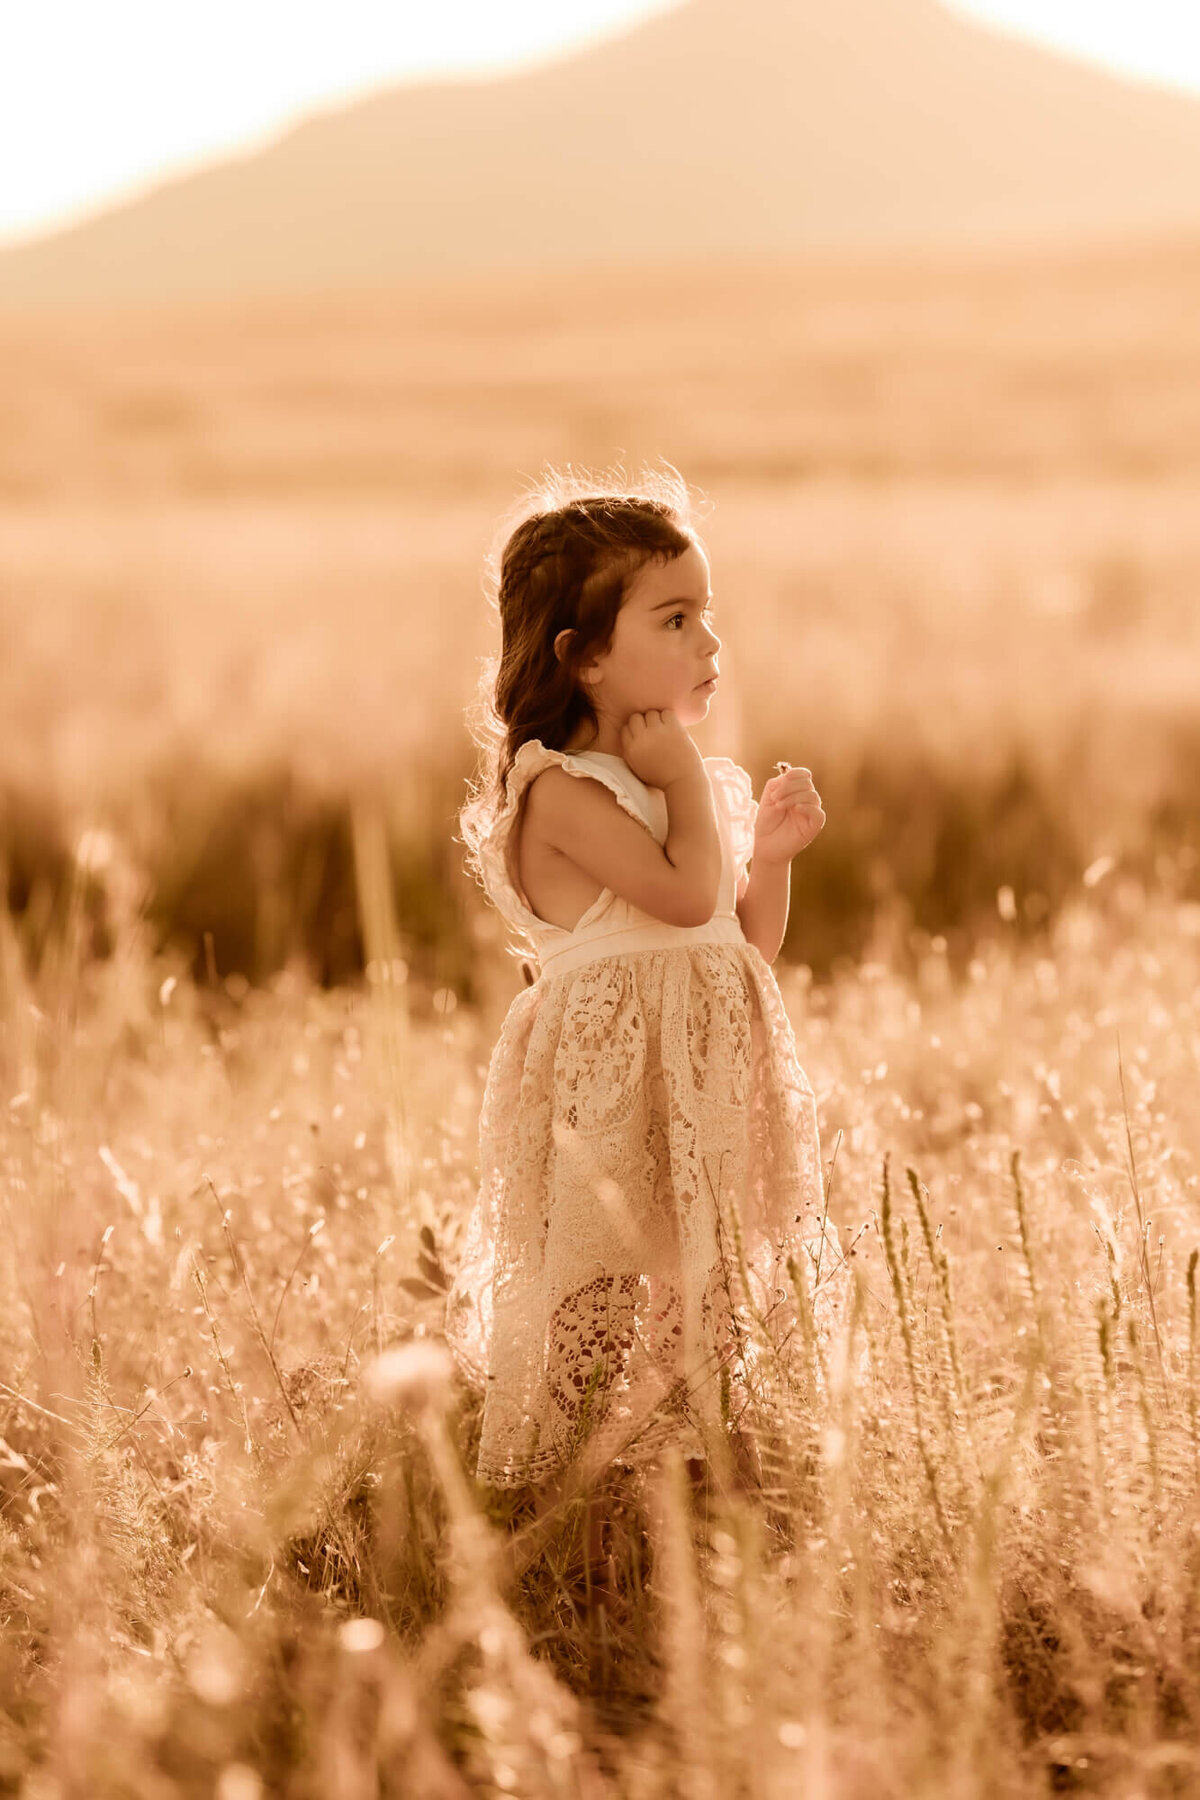 Little girl wearing a golden dress rests her hand under her chin as she looks off into the distance.